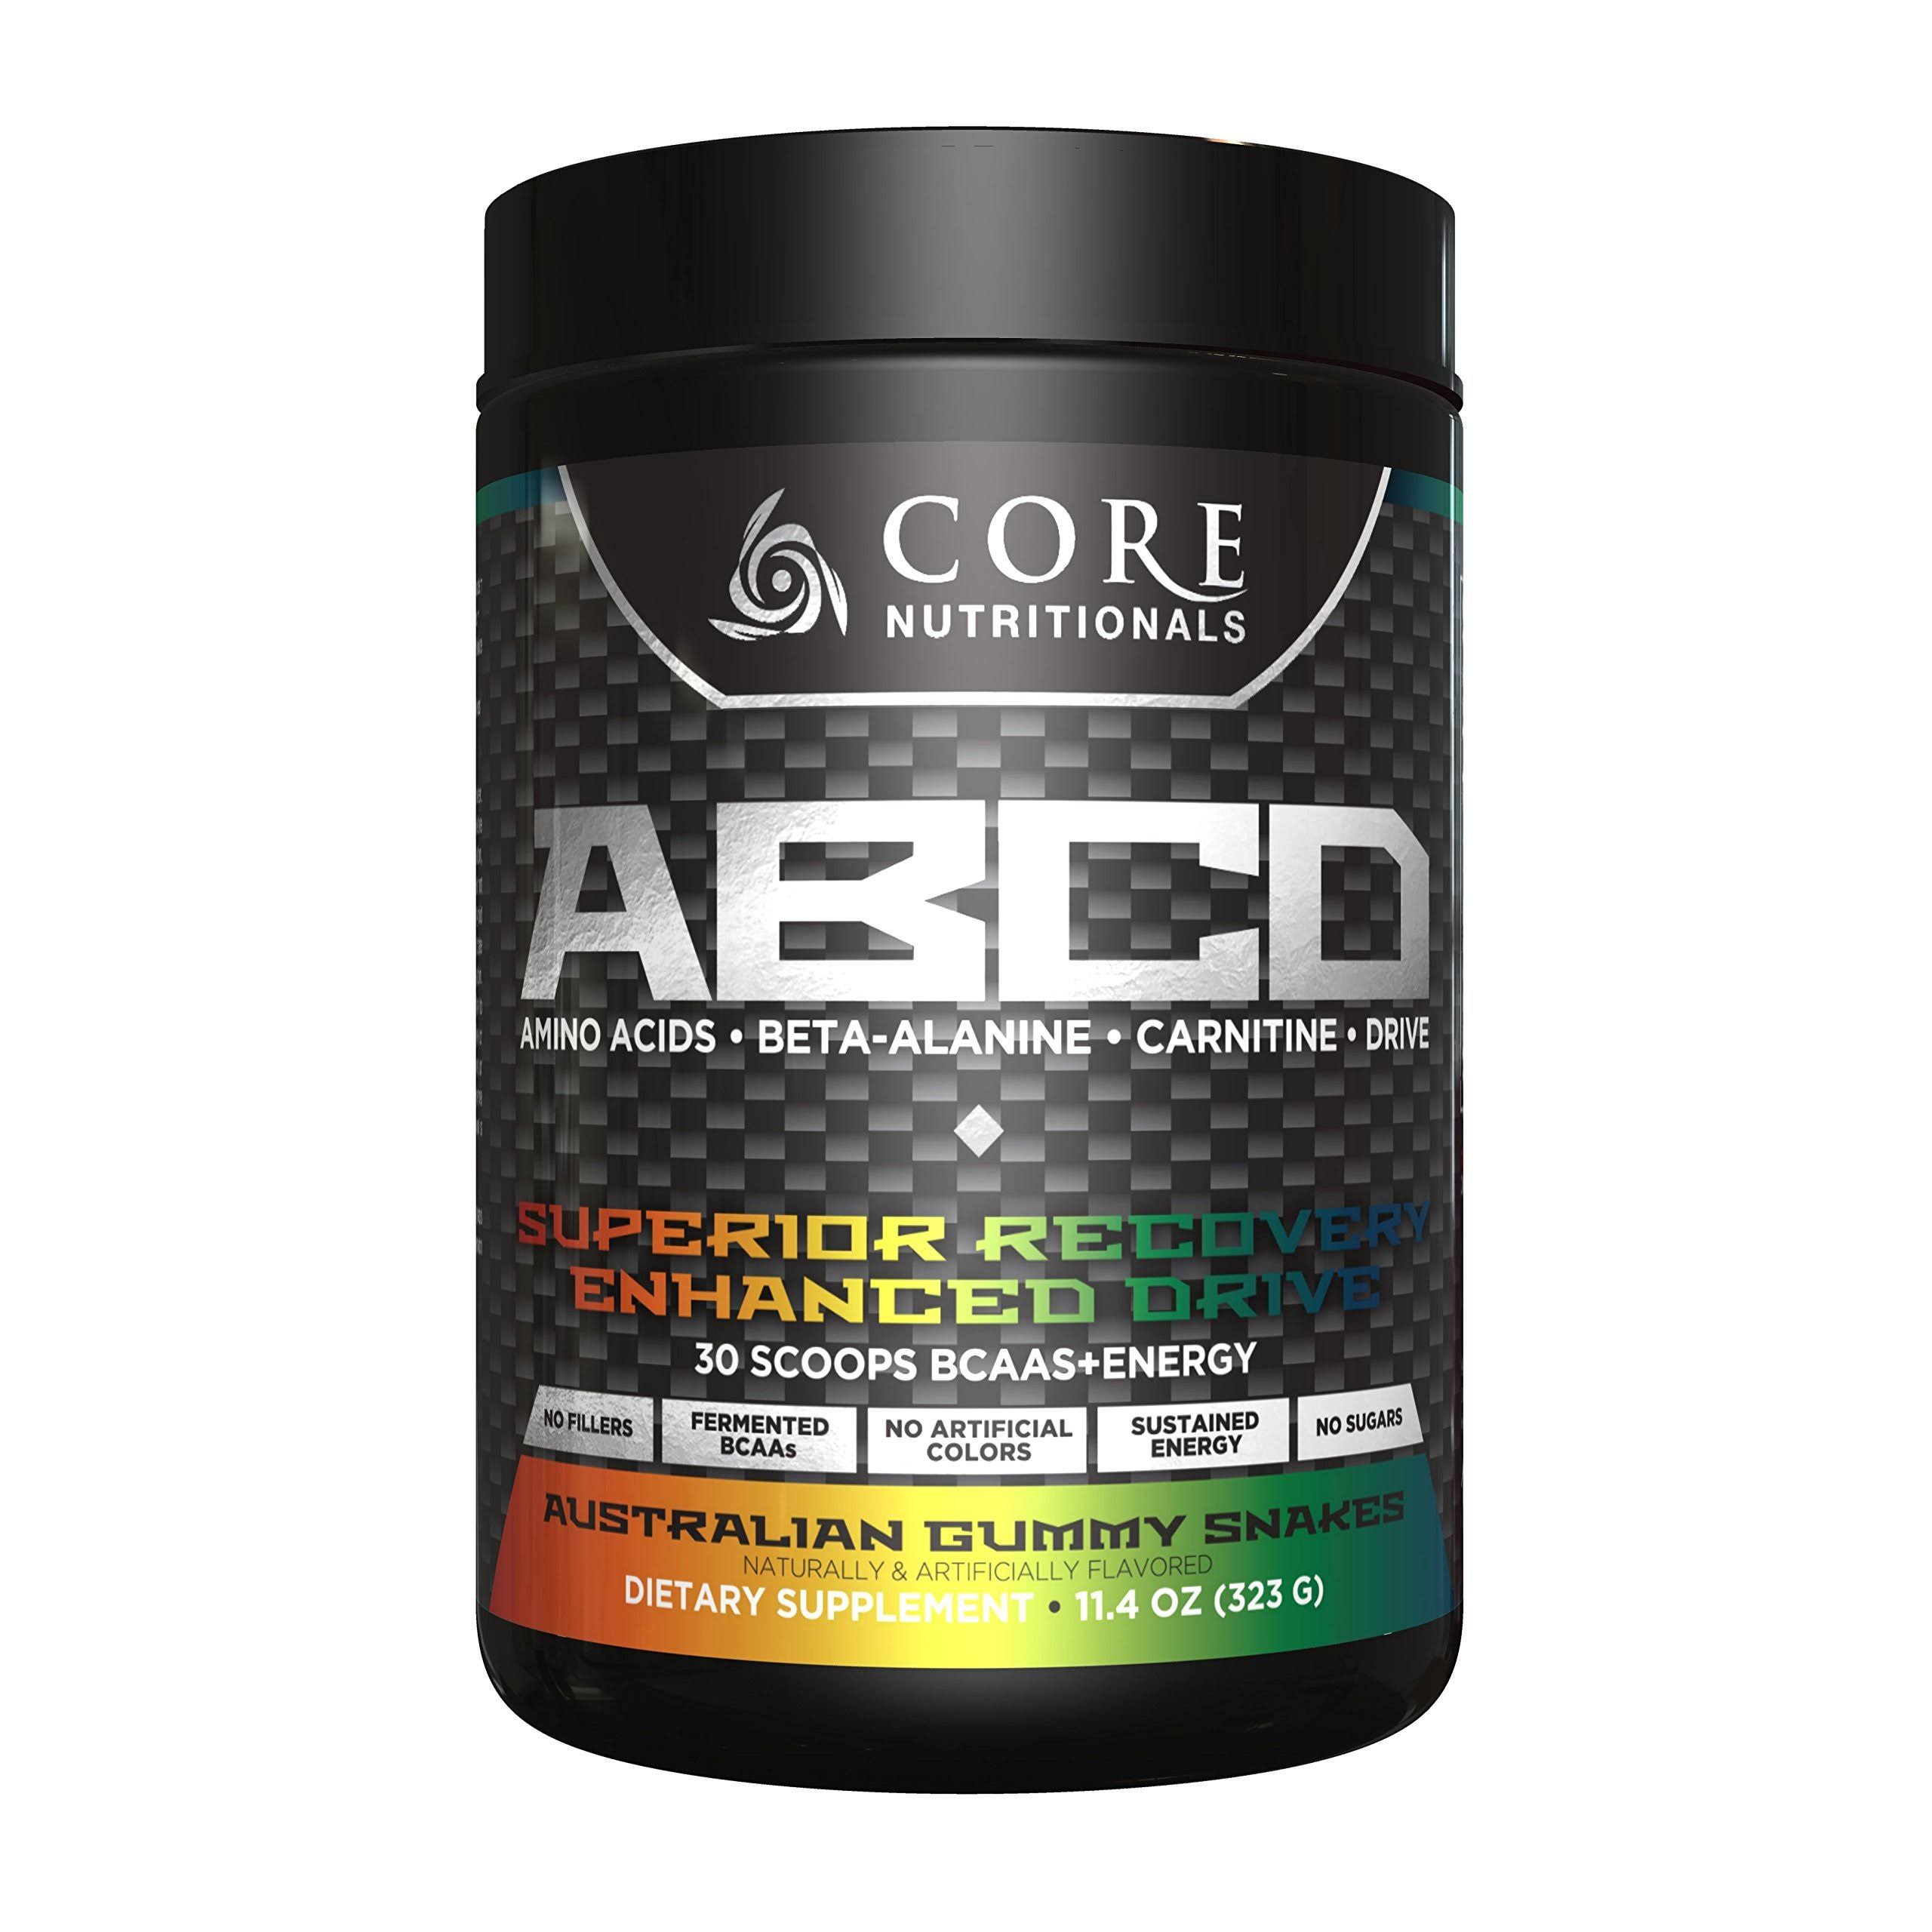 Core Nutritionals Core ABCD Dietary Supplement - Australian Gummy Snakes, 323g